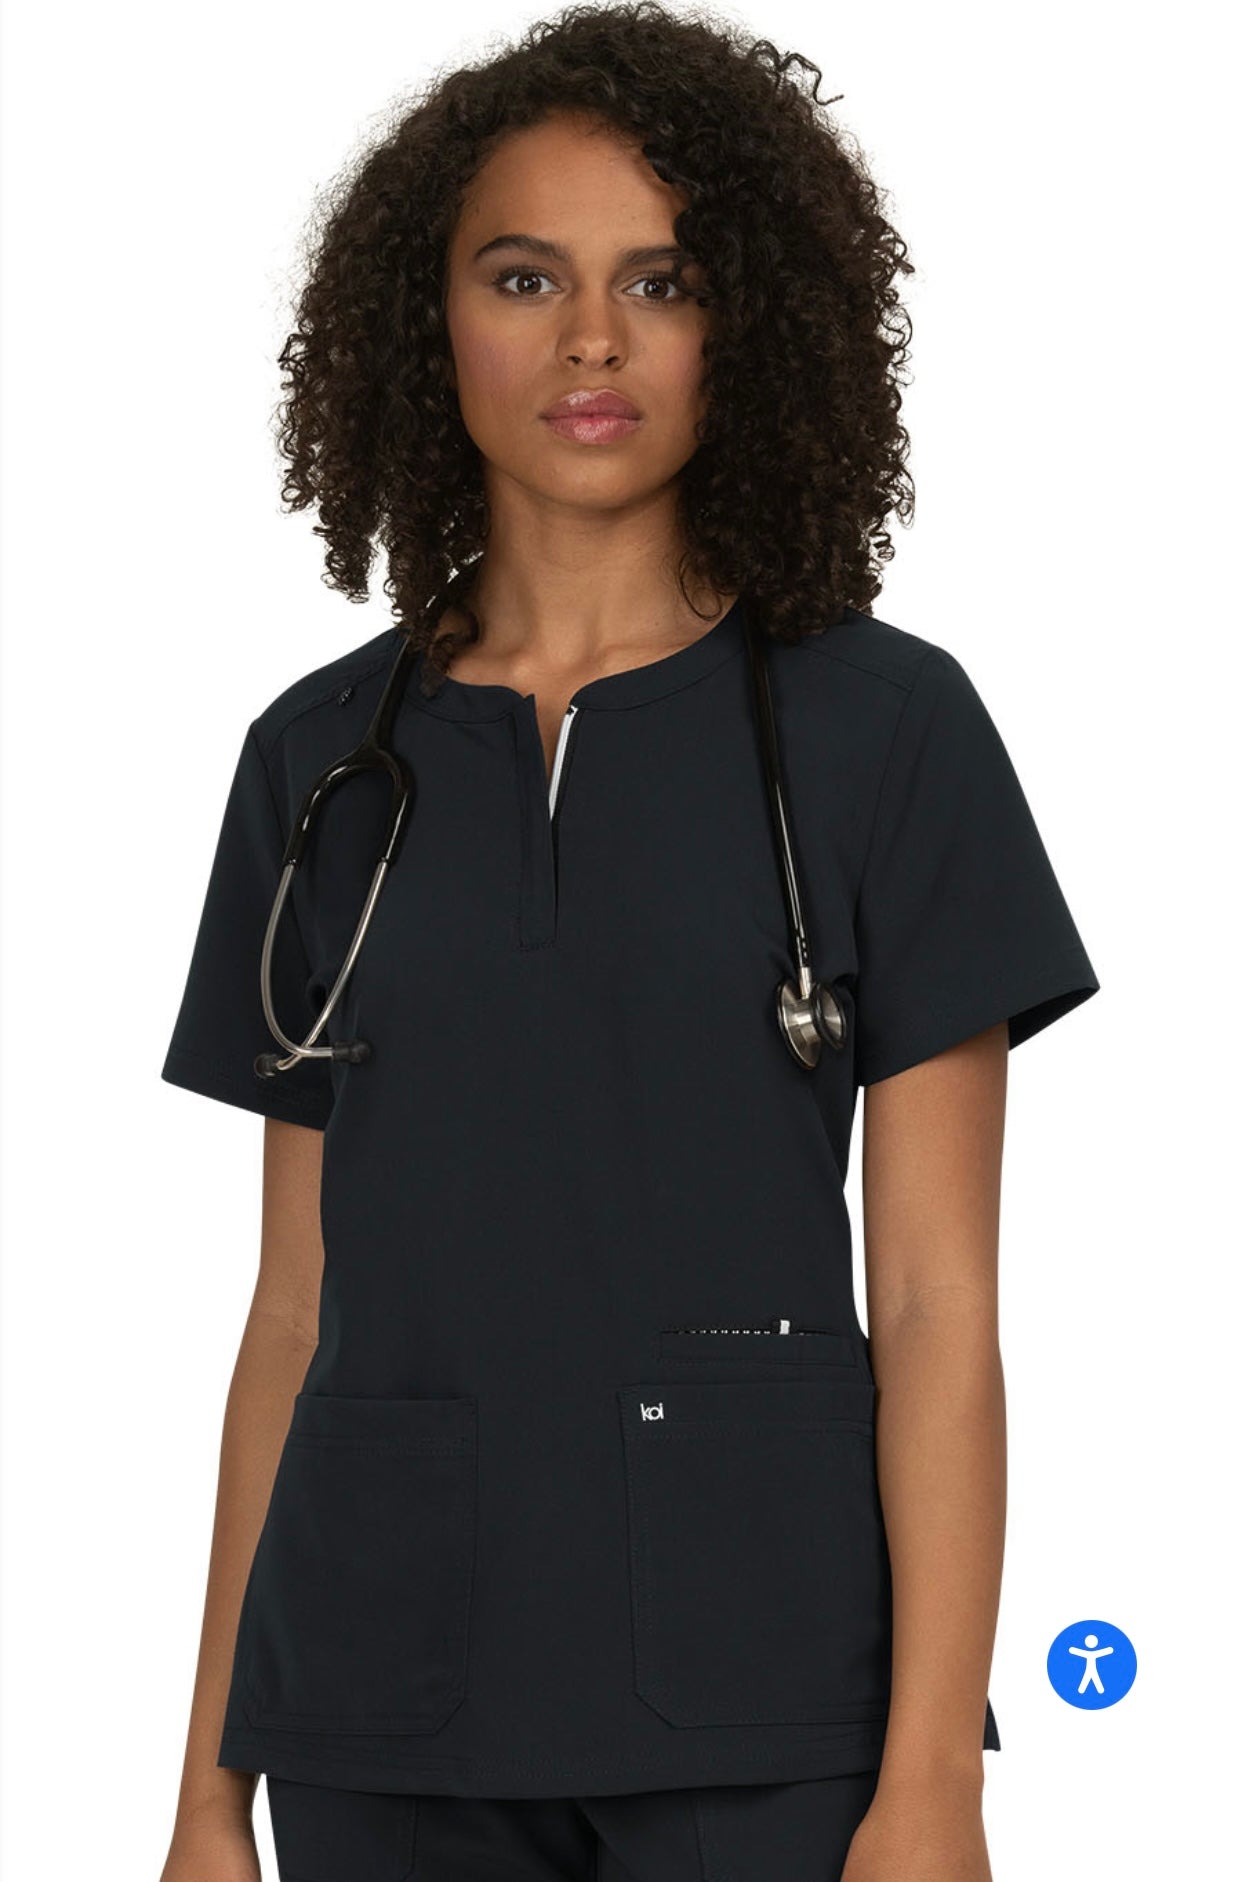 Back in Action Scrub Top